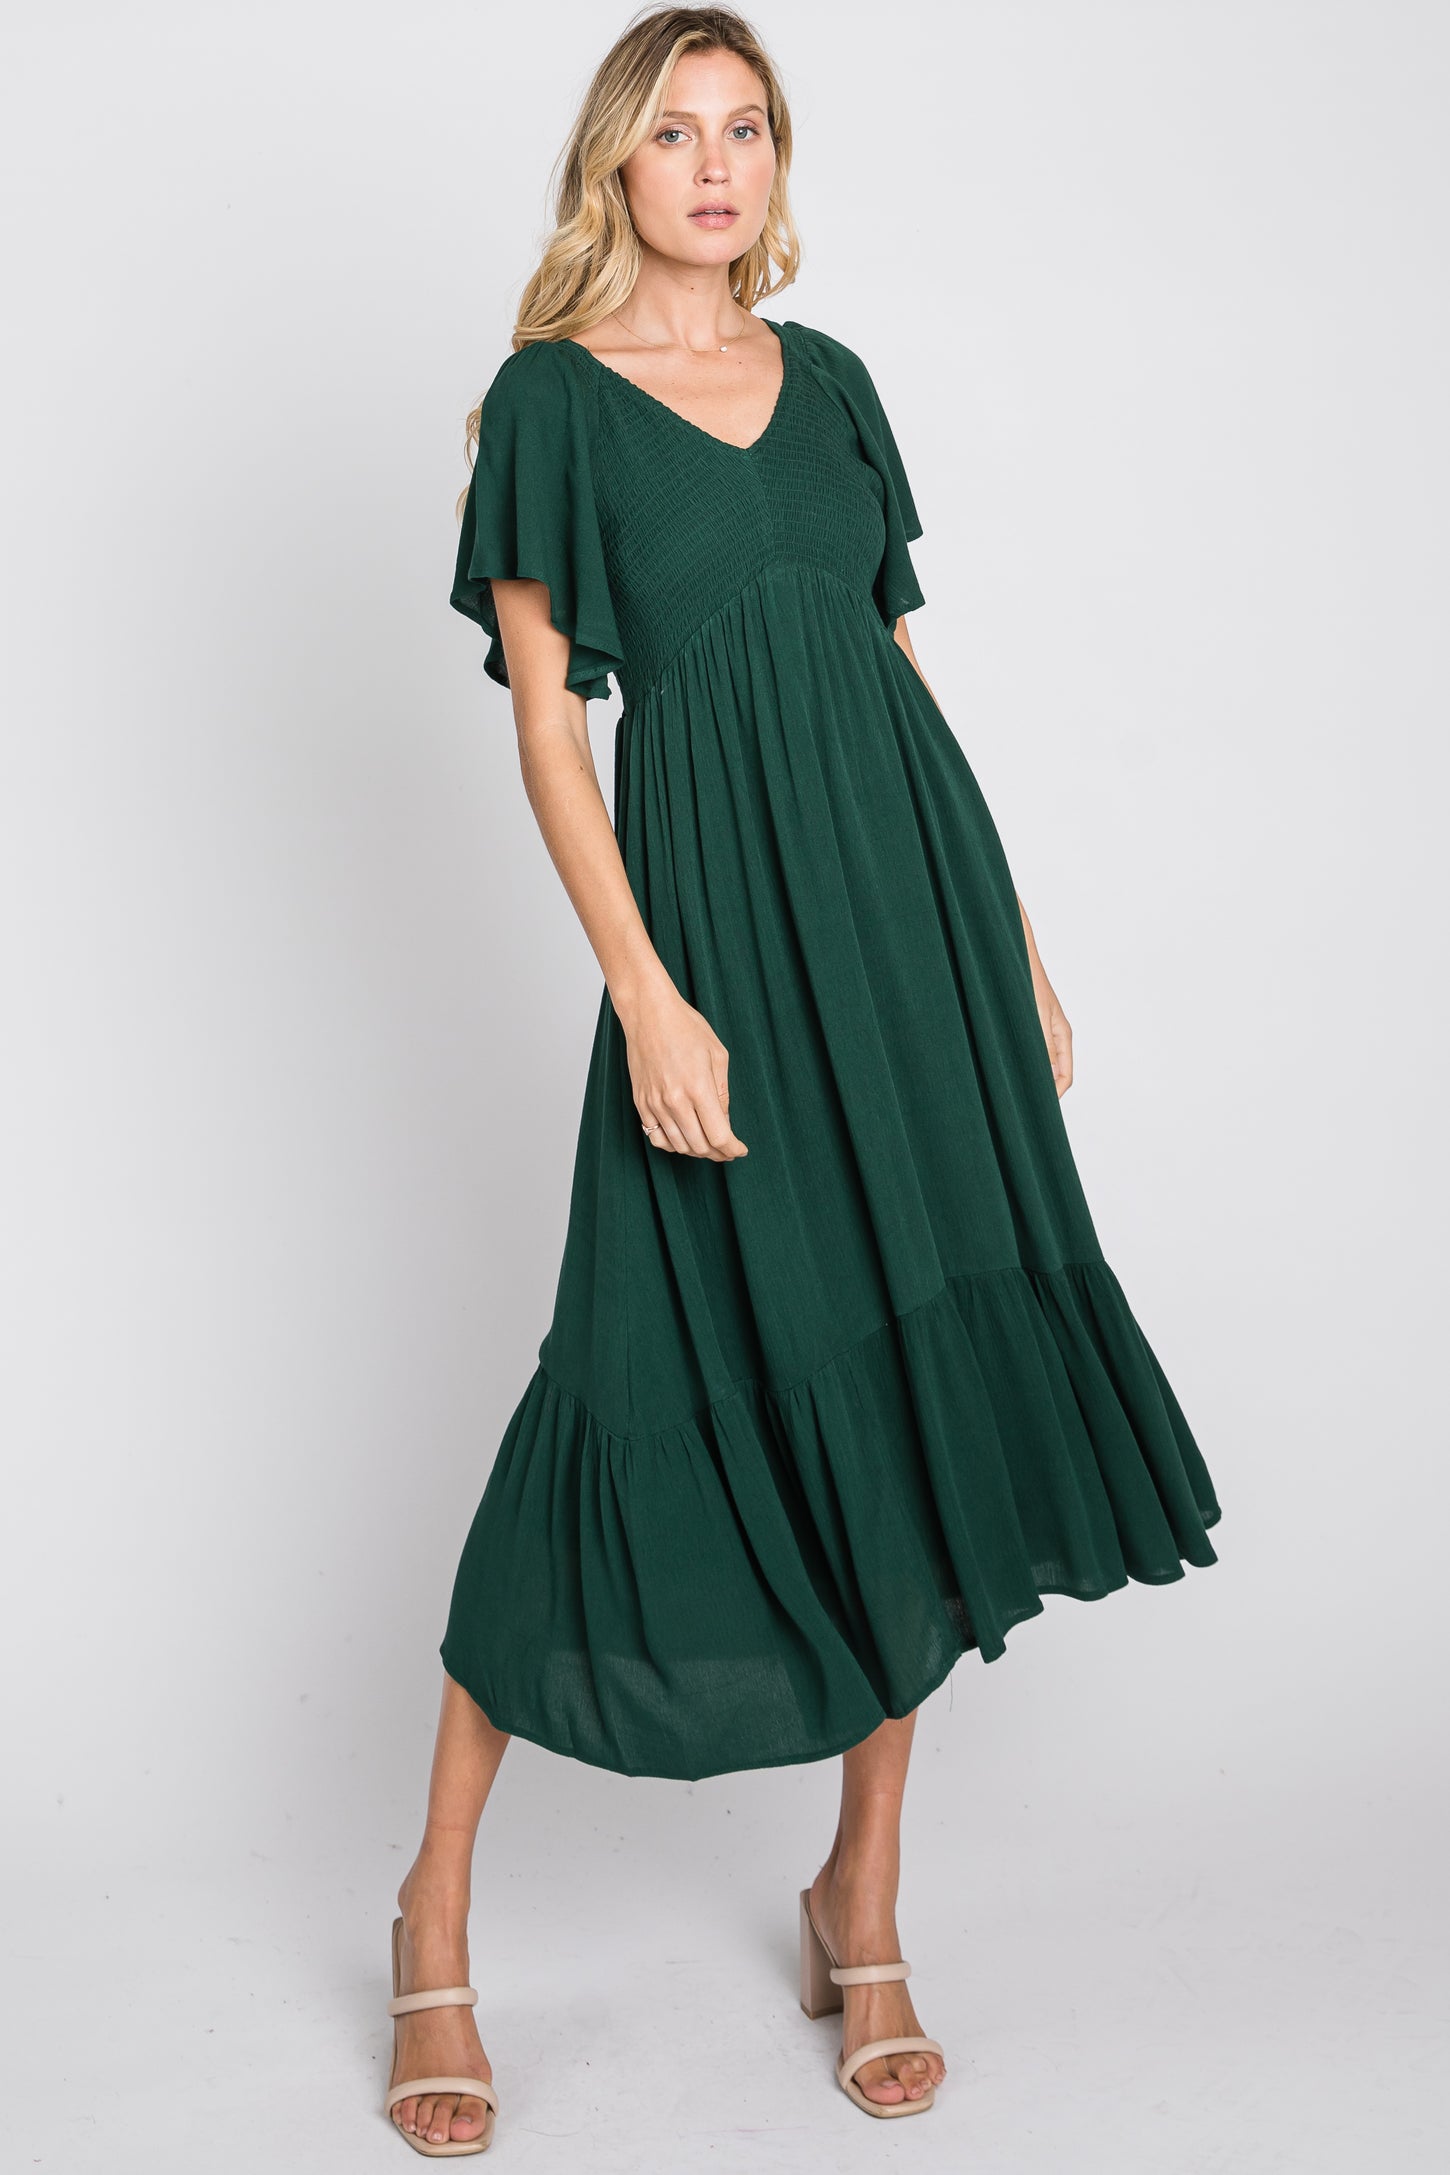 Forest Green Smocked Ruffle Dress